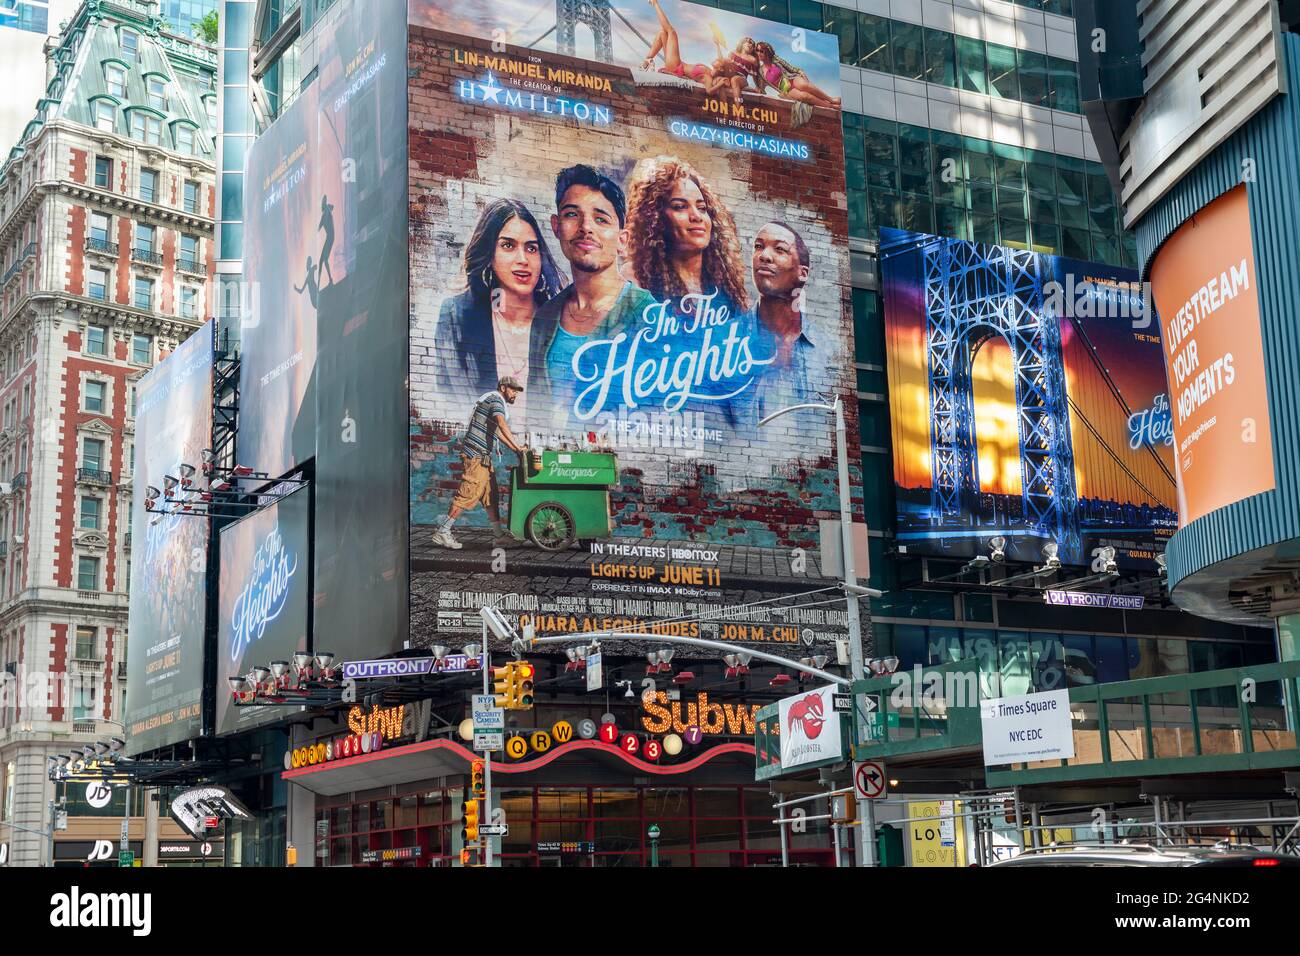 The film version of Lin-Manuel Mirandas’ musical “In the Heights” is advertised in Times Square in New York on Wednesday, June 9, 2021. “In the Heights” is to open the Tribeca Film Festival with 13 simultaneous showings around the city. (© Richard B. Levine) Stock Photo